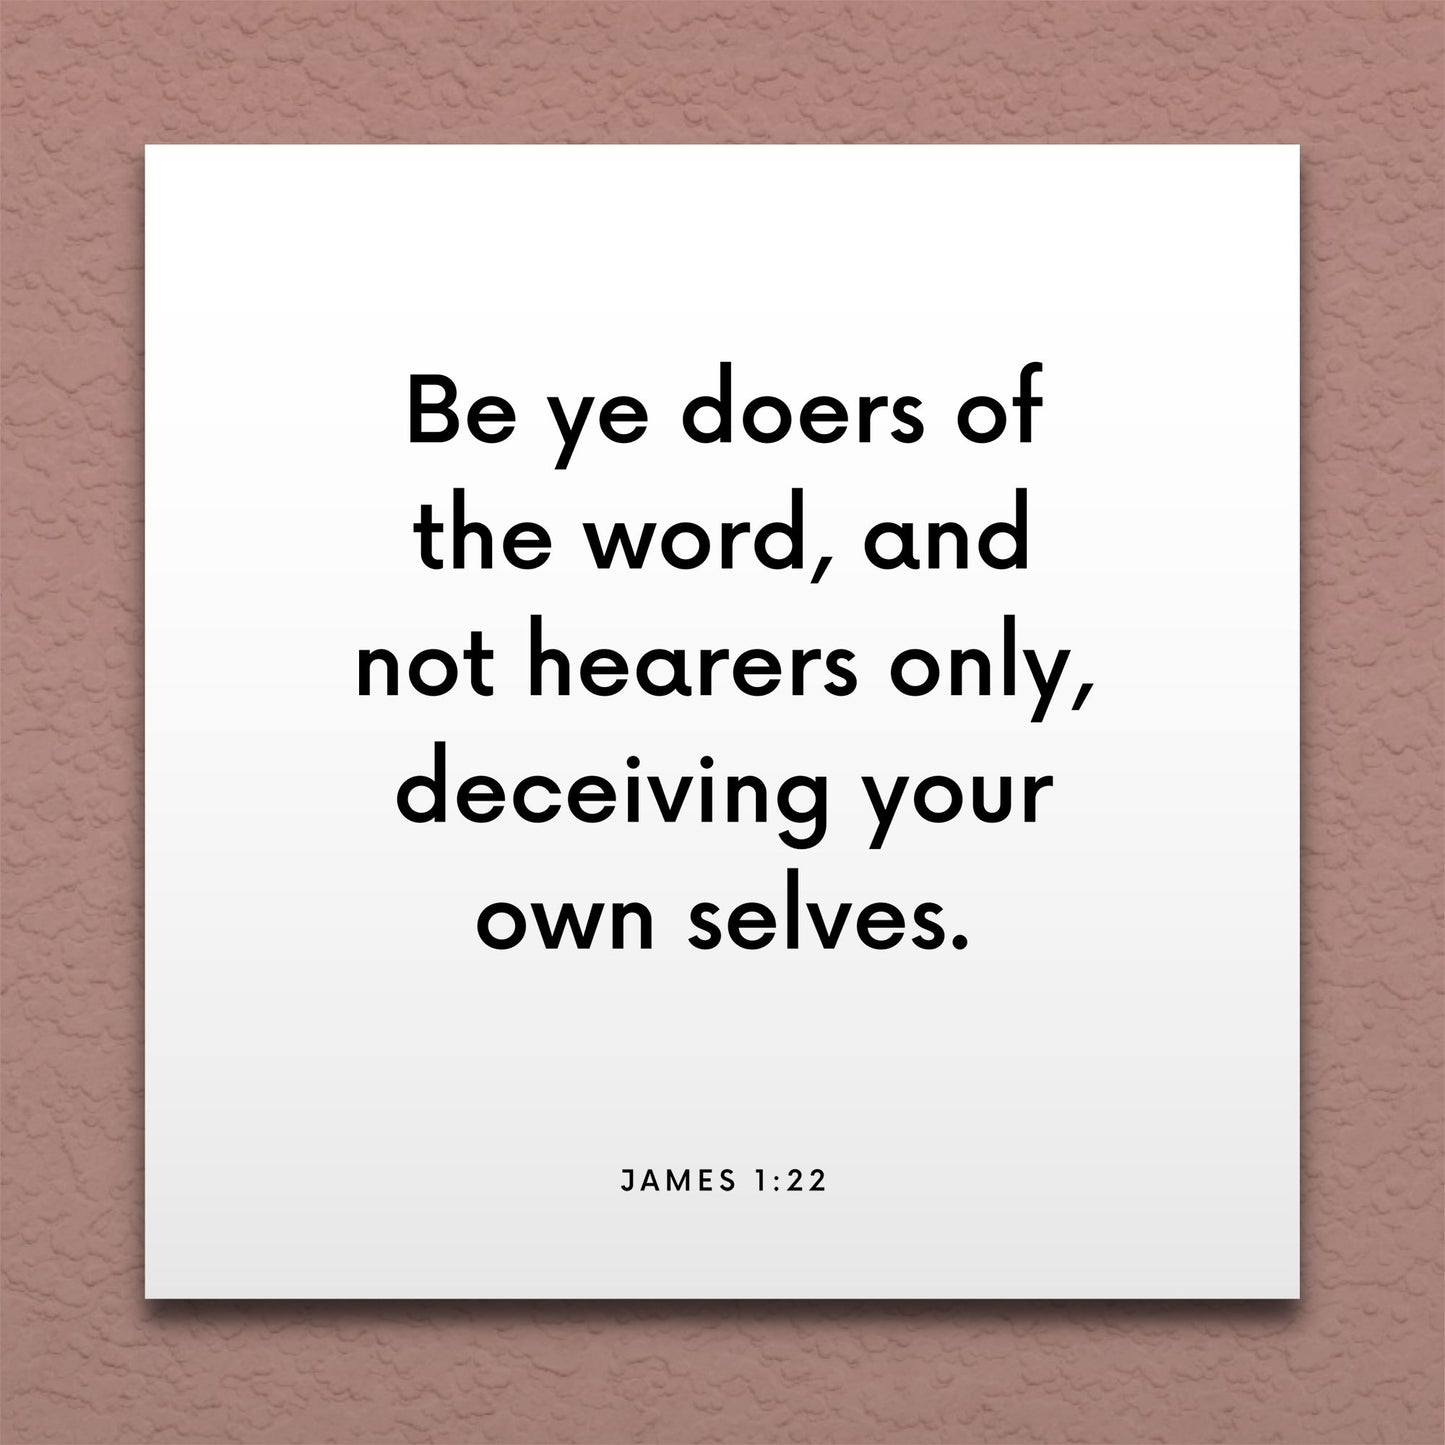 Wall-mounted scripture tile for James 1:22 - "Be ye doers of the word, and not hearers only"